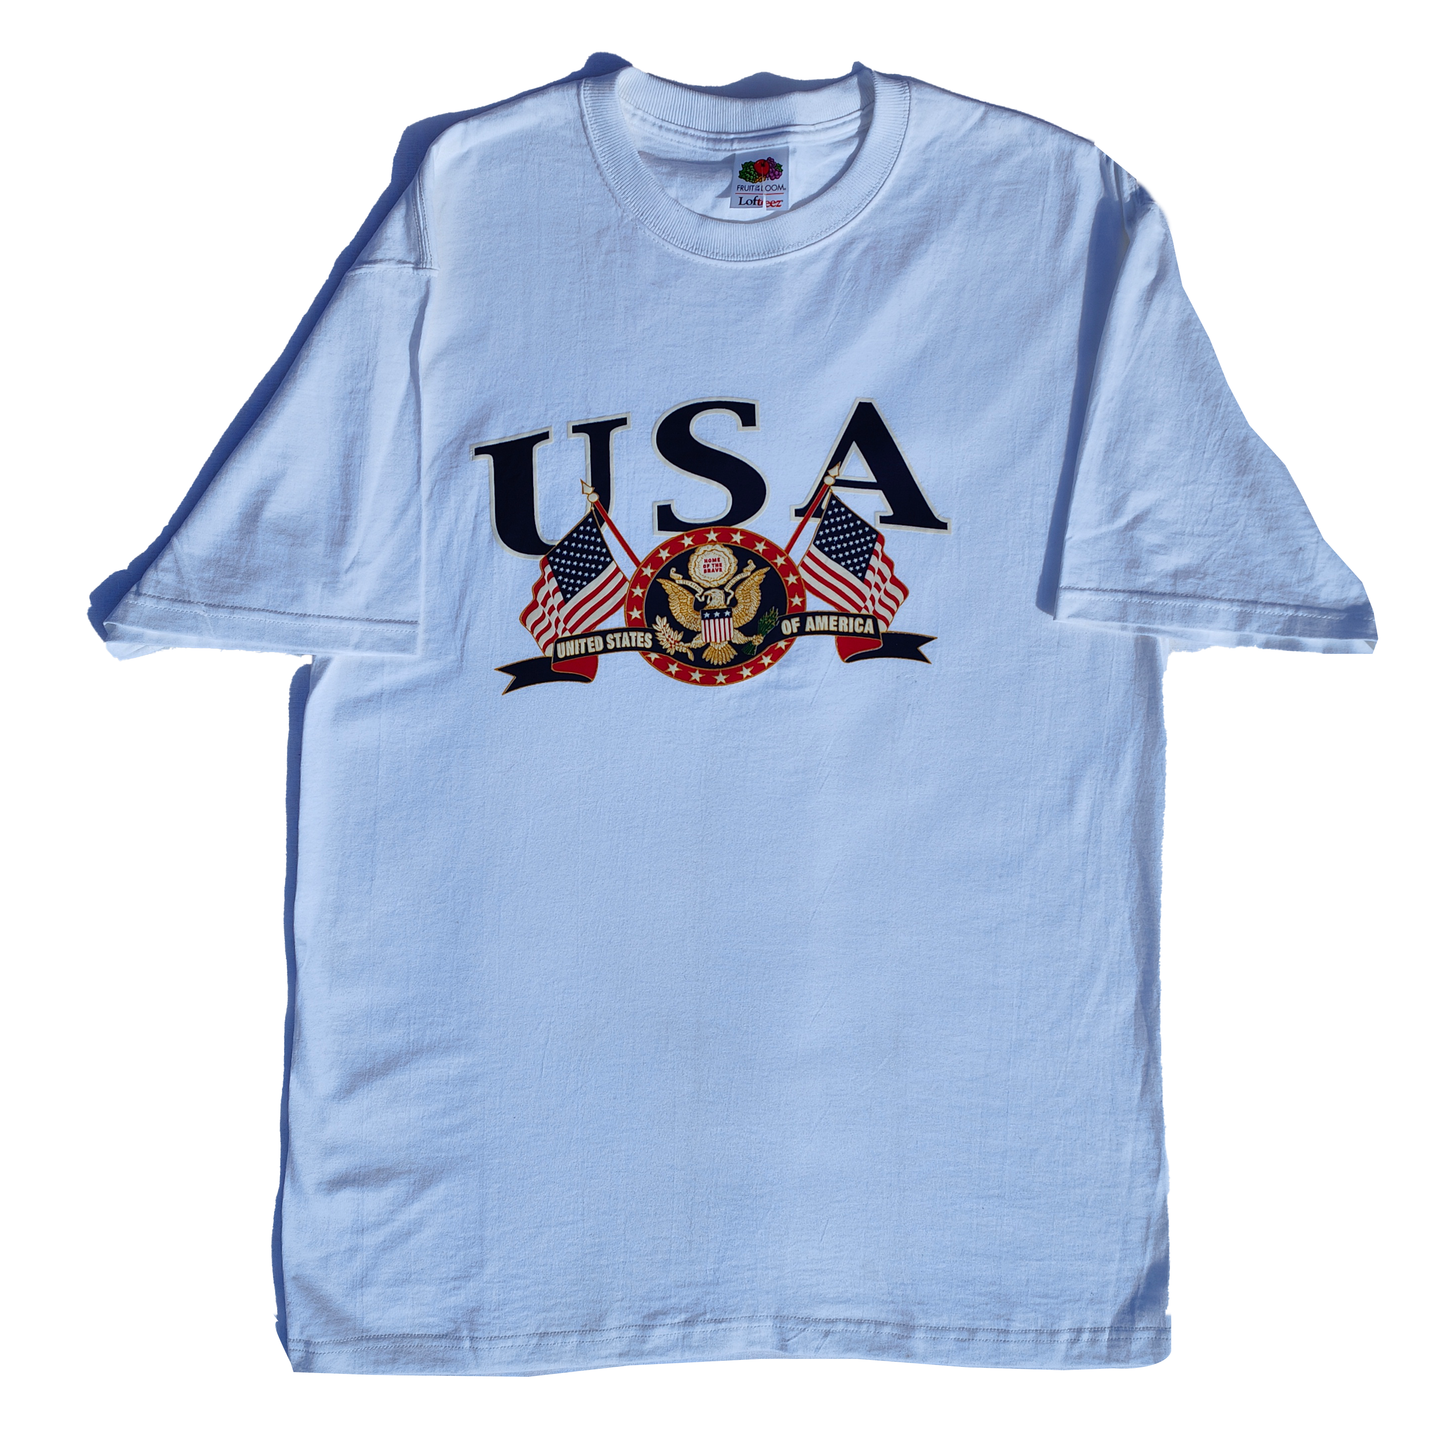 Fruit of the Loom USA T Shirt - XL